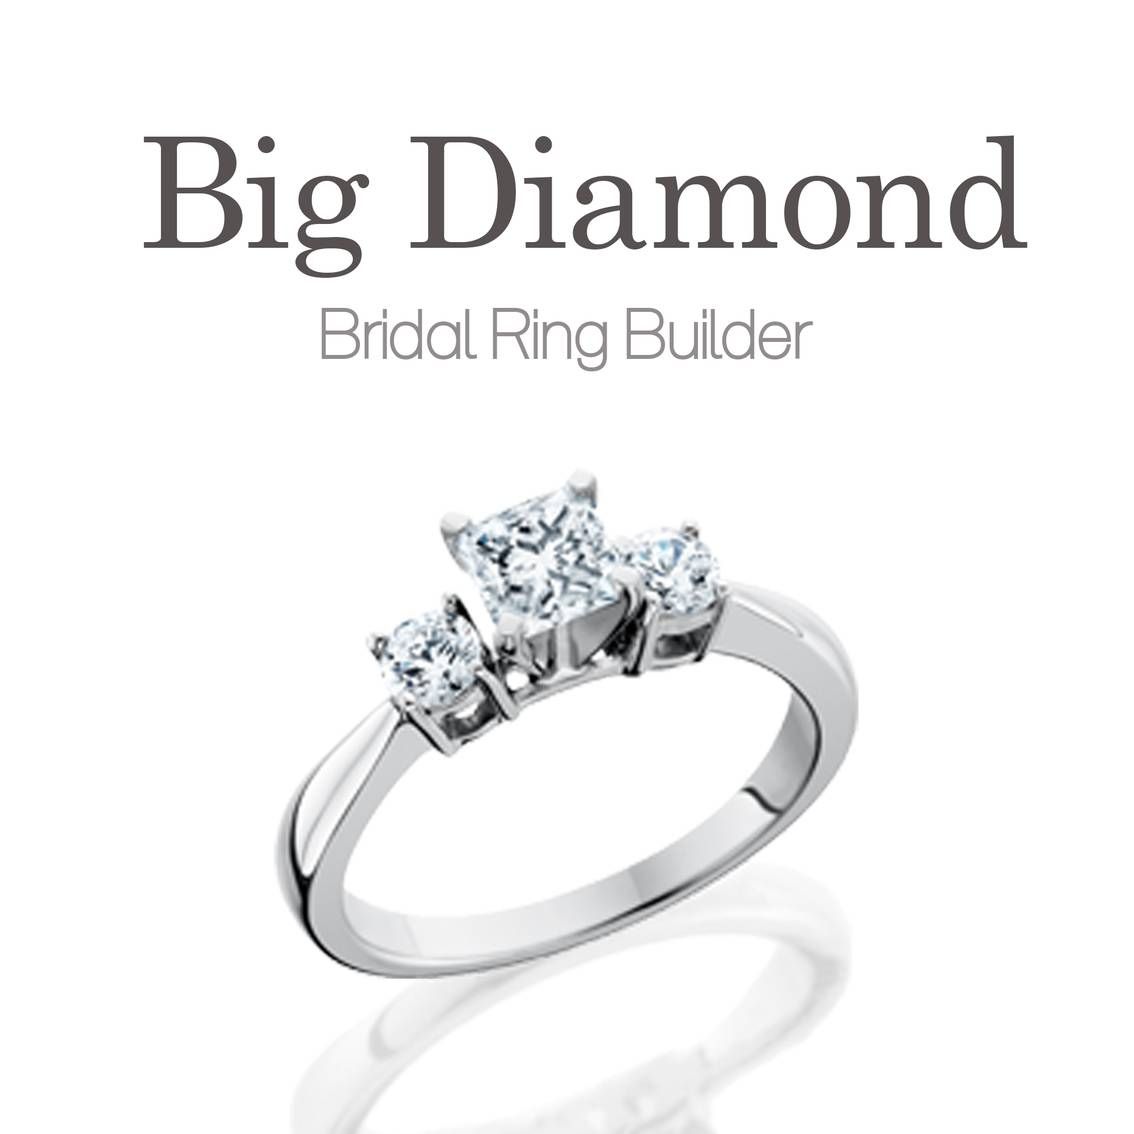 Big Diamond Bridal Ring | Big Diamond Bridal Ring | Jewelry In Jewelry Stores Wedding Rings (View 1 of 15)